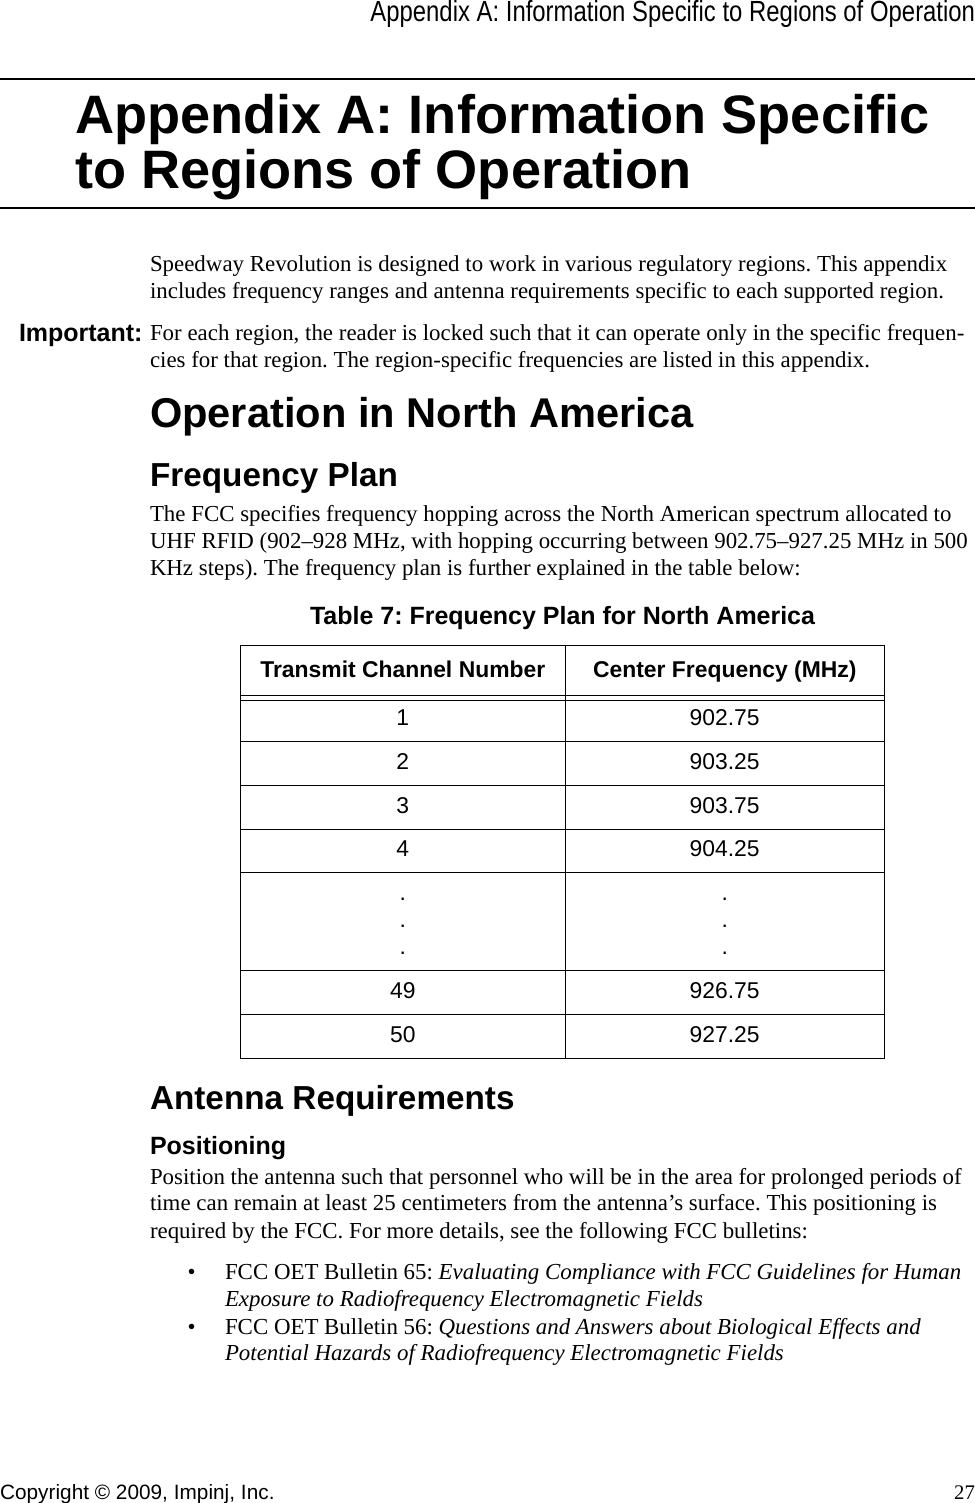 Appendix A: Information Specific to Regions of OperationCopyright © 2009, Impinj, Inc. 27Appendix A: Information Specific to Regions of OperationSpeedway Revolution is designed to work in various regulatory regions. This appendix includes frequency ranges and antenna requirements specific to each supported region. Important: For each region, the reader is locked such that it can operate only in the specific frequen-cies for that region. The region-specific frequencies are listed in this appendix.Operation in North AmericaFrequency PlanThe FCC specifies frequency hopping across the North American spectrum allocated to UHF RFID (902–928 MHz, with hopping occurring between 902.75–927.25 MHz in 500 KHz steps). The frequency plan is further explained in the table below:Antenna RequirementsPositioningPosition the antenna such that personnel who will be in the area for prolonged periods of time can remain at least 25 centimeters from the antenna’s surface. This positioning is required by the FCC. For more details, see the following FCC bulletins:• FCC OET Bulletin 65: Evaluating Compliance with FCC Guidelines for Human Exposure to Radiofrequency Electromagnetic Fields• FCC OET Bulletin 56: Questions and Answers about Biological Effects and Potential Hazards of Radiofrequency Electromagnetic FieldsTable 7: Frequency Plan for North AmericaTransmit Channel Number Center Frequency (MHz)1 902.752 903.253 903.754 904.25......49 926.7550 927.25